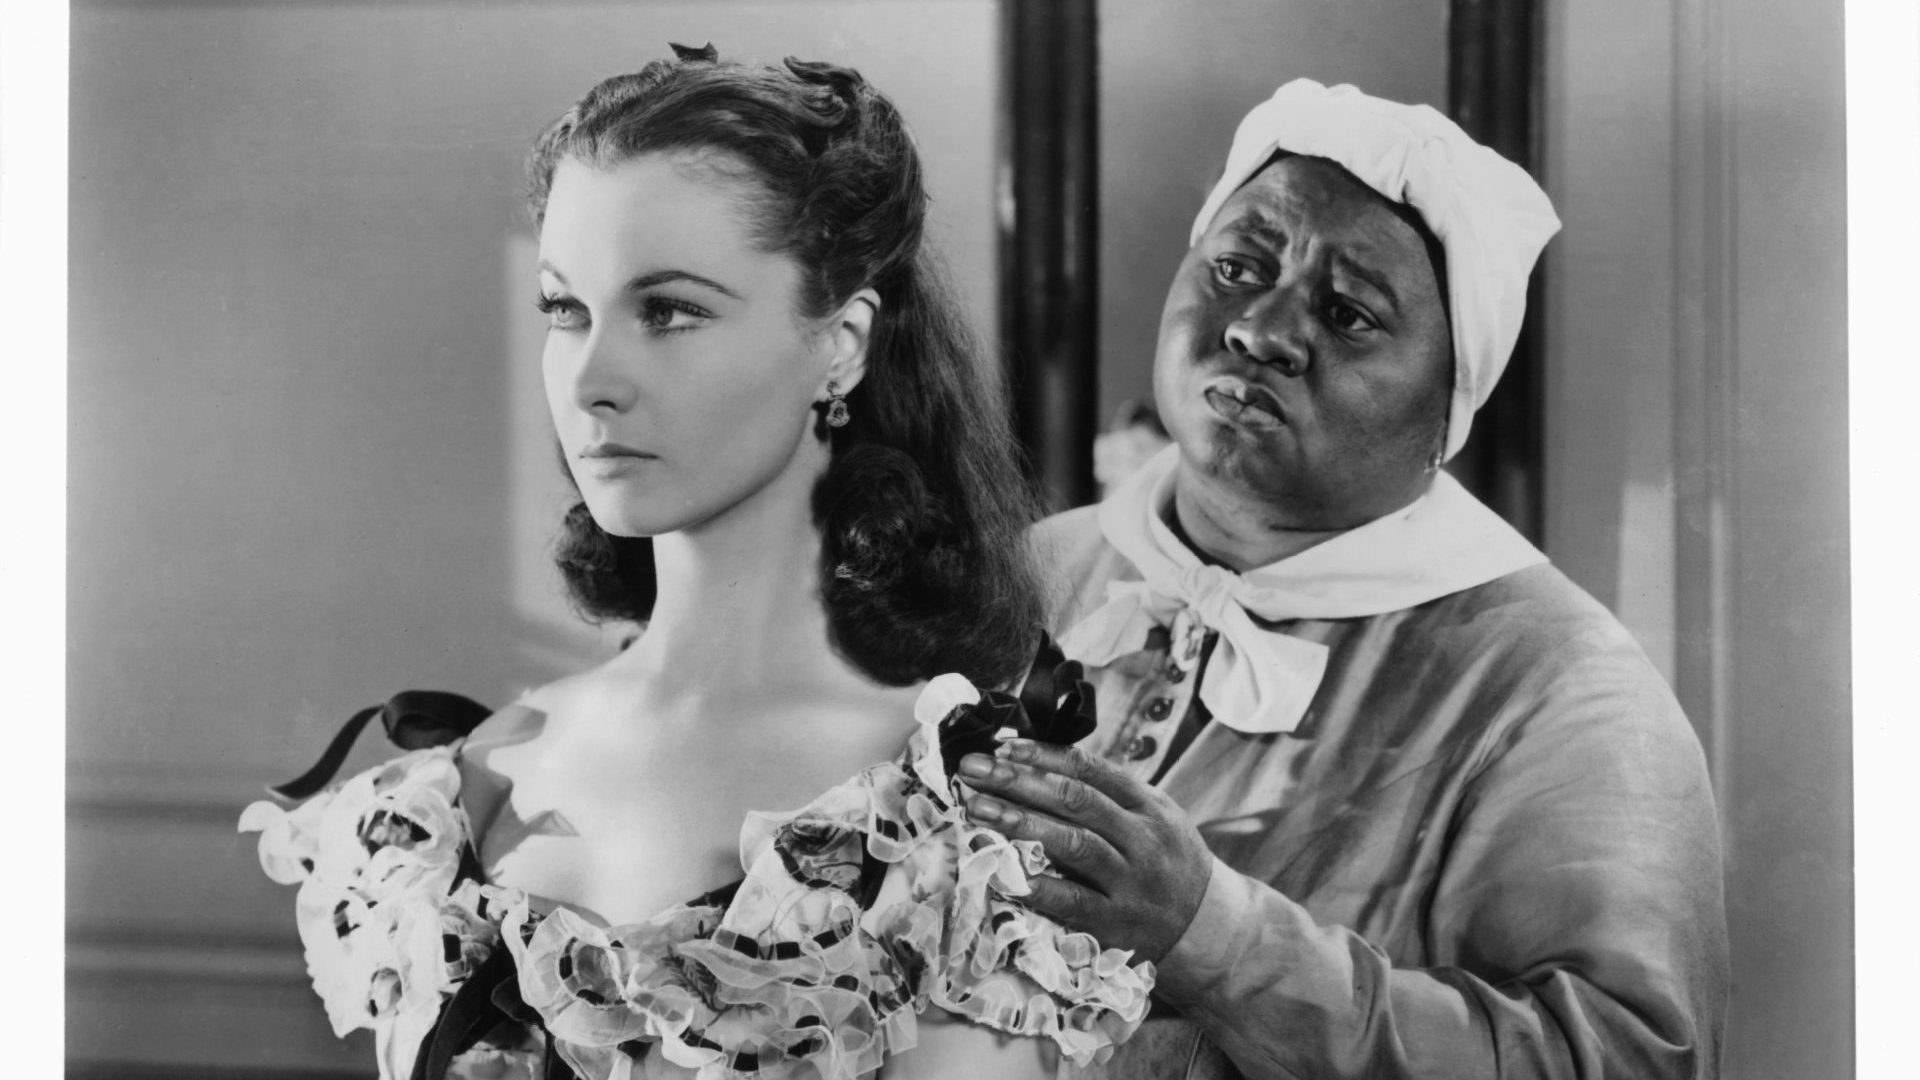 Vivien Leigh and Hattie McDaniel in a 
scene from Gone with the Wind, 1939. Photo: Metro-Goldwyn-Mayer/Getty 
Images